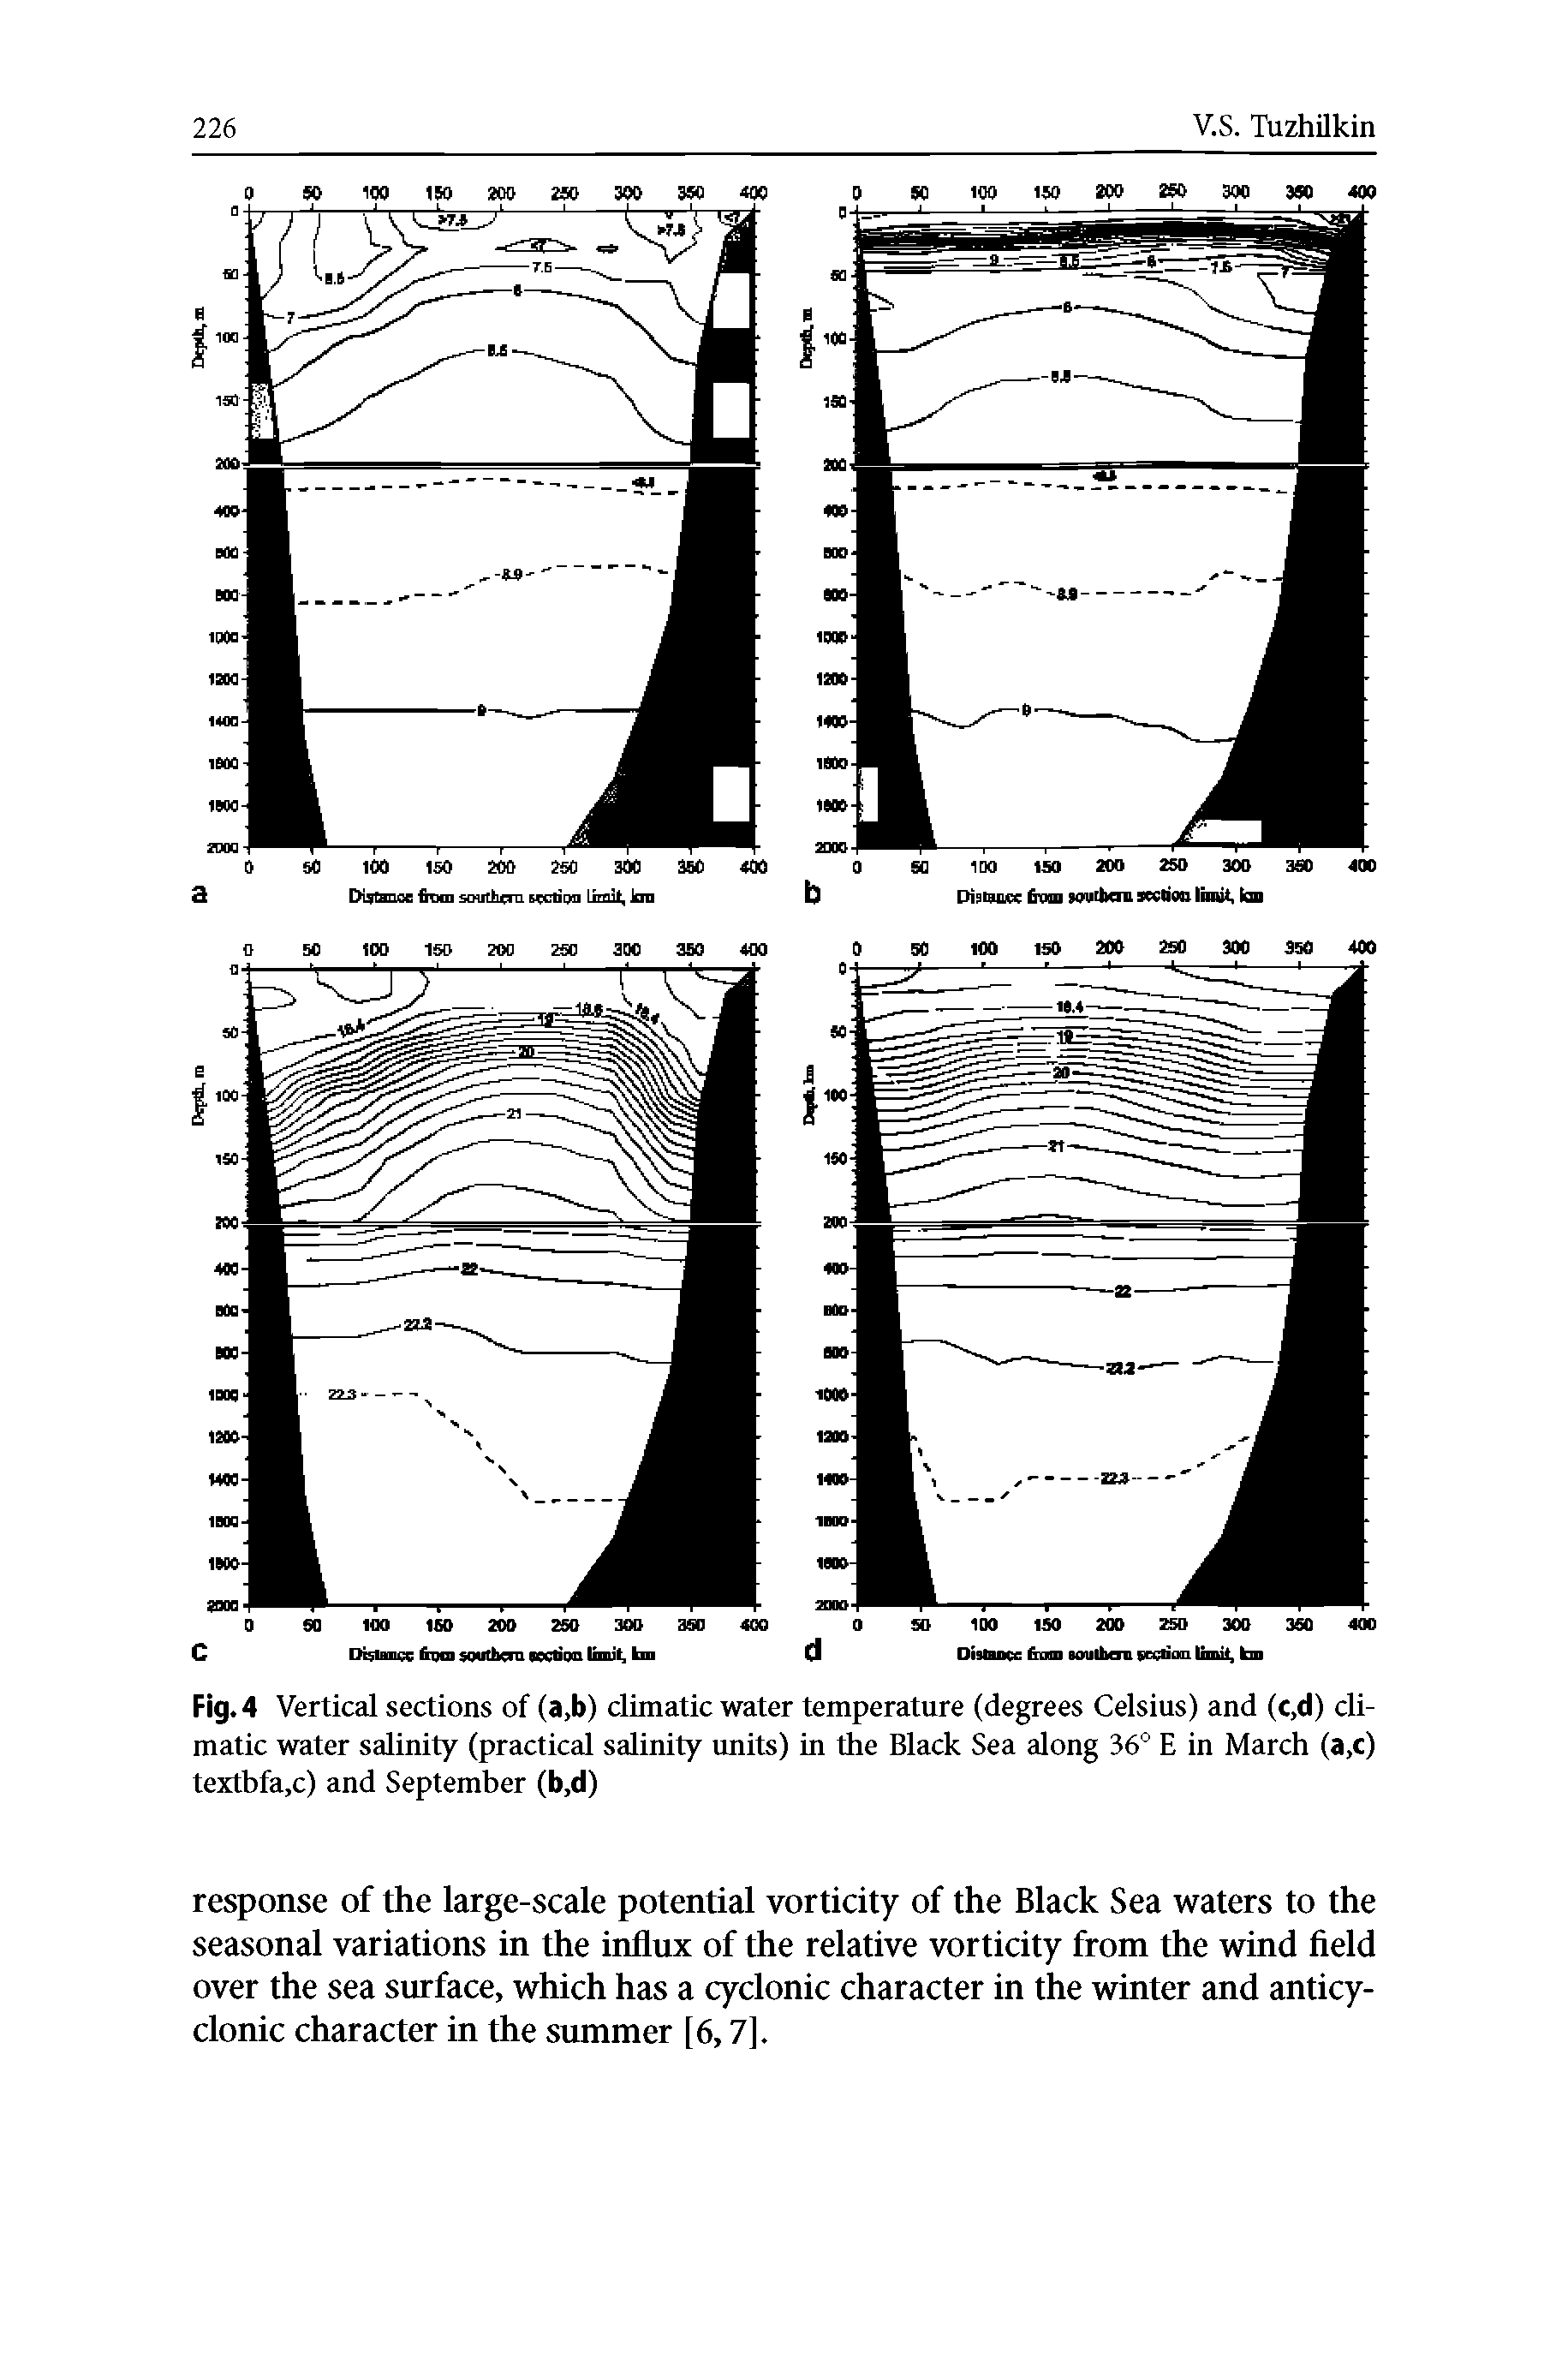 Fig. 4 Vertical sections of (a,b) climatic water temperature (degrees Celsius) and (c,d) climatic water salinity (practical salinity units) in the Black Sea along 36° E in March (a,c) textbfa,c) and September (b,d)...